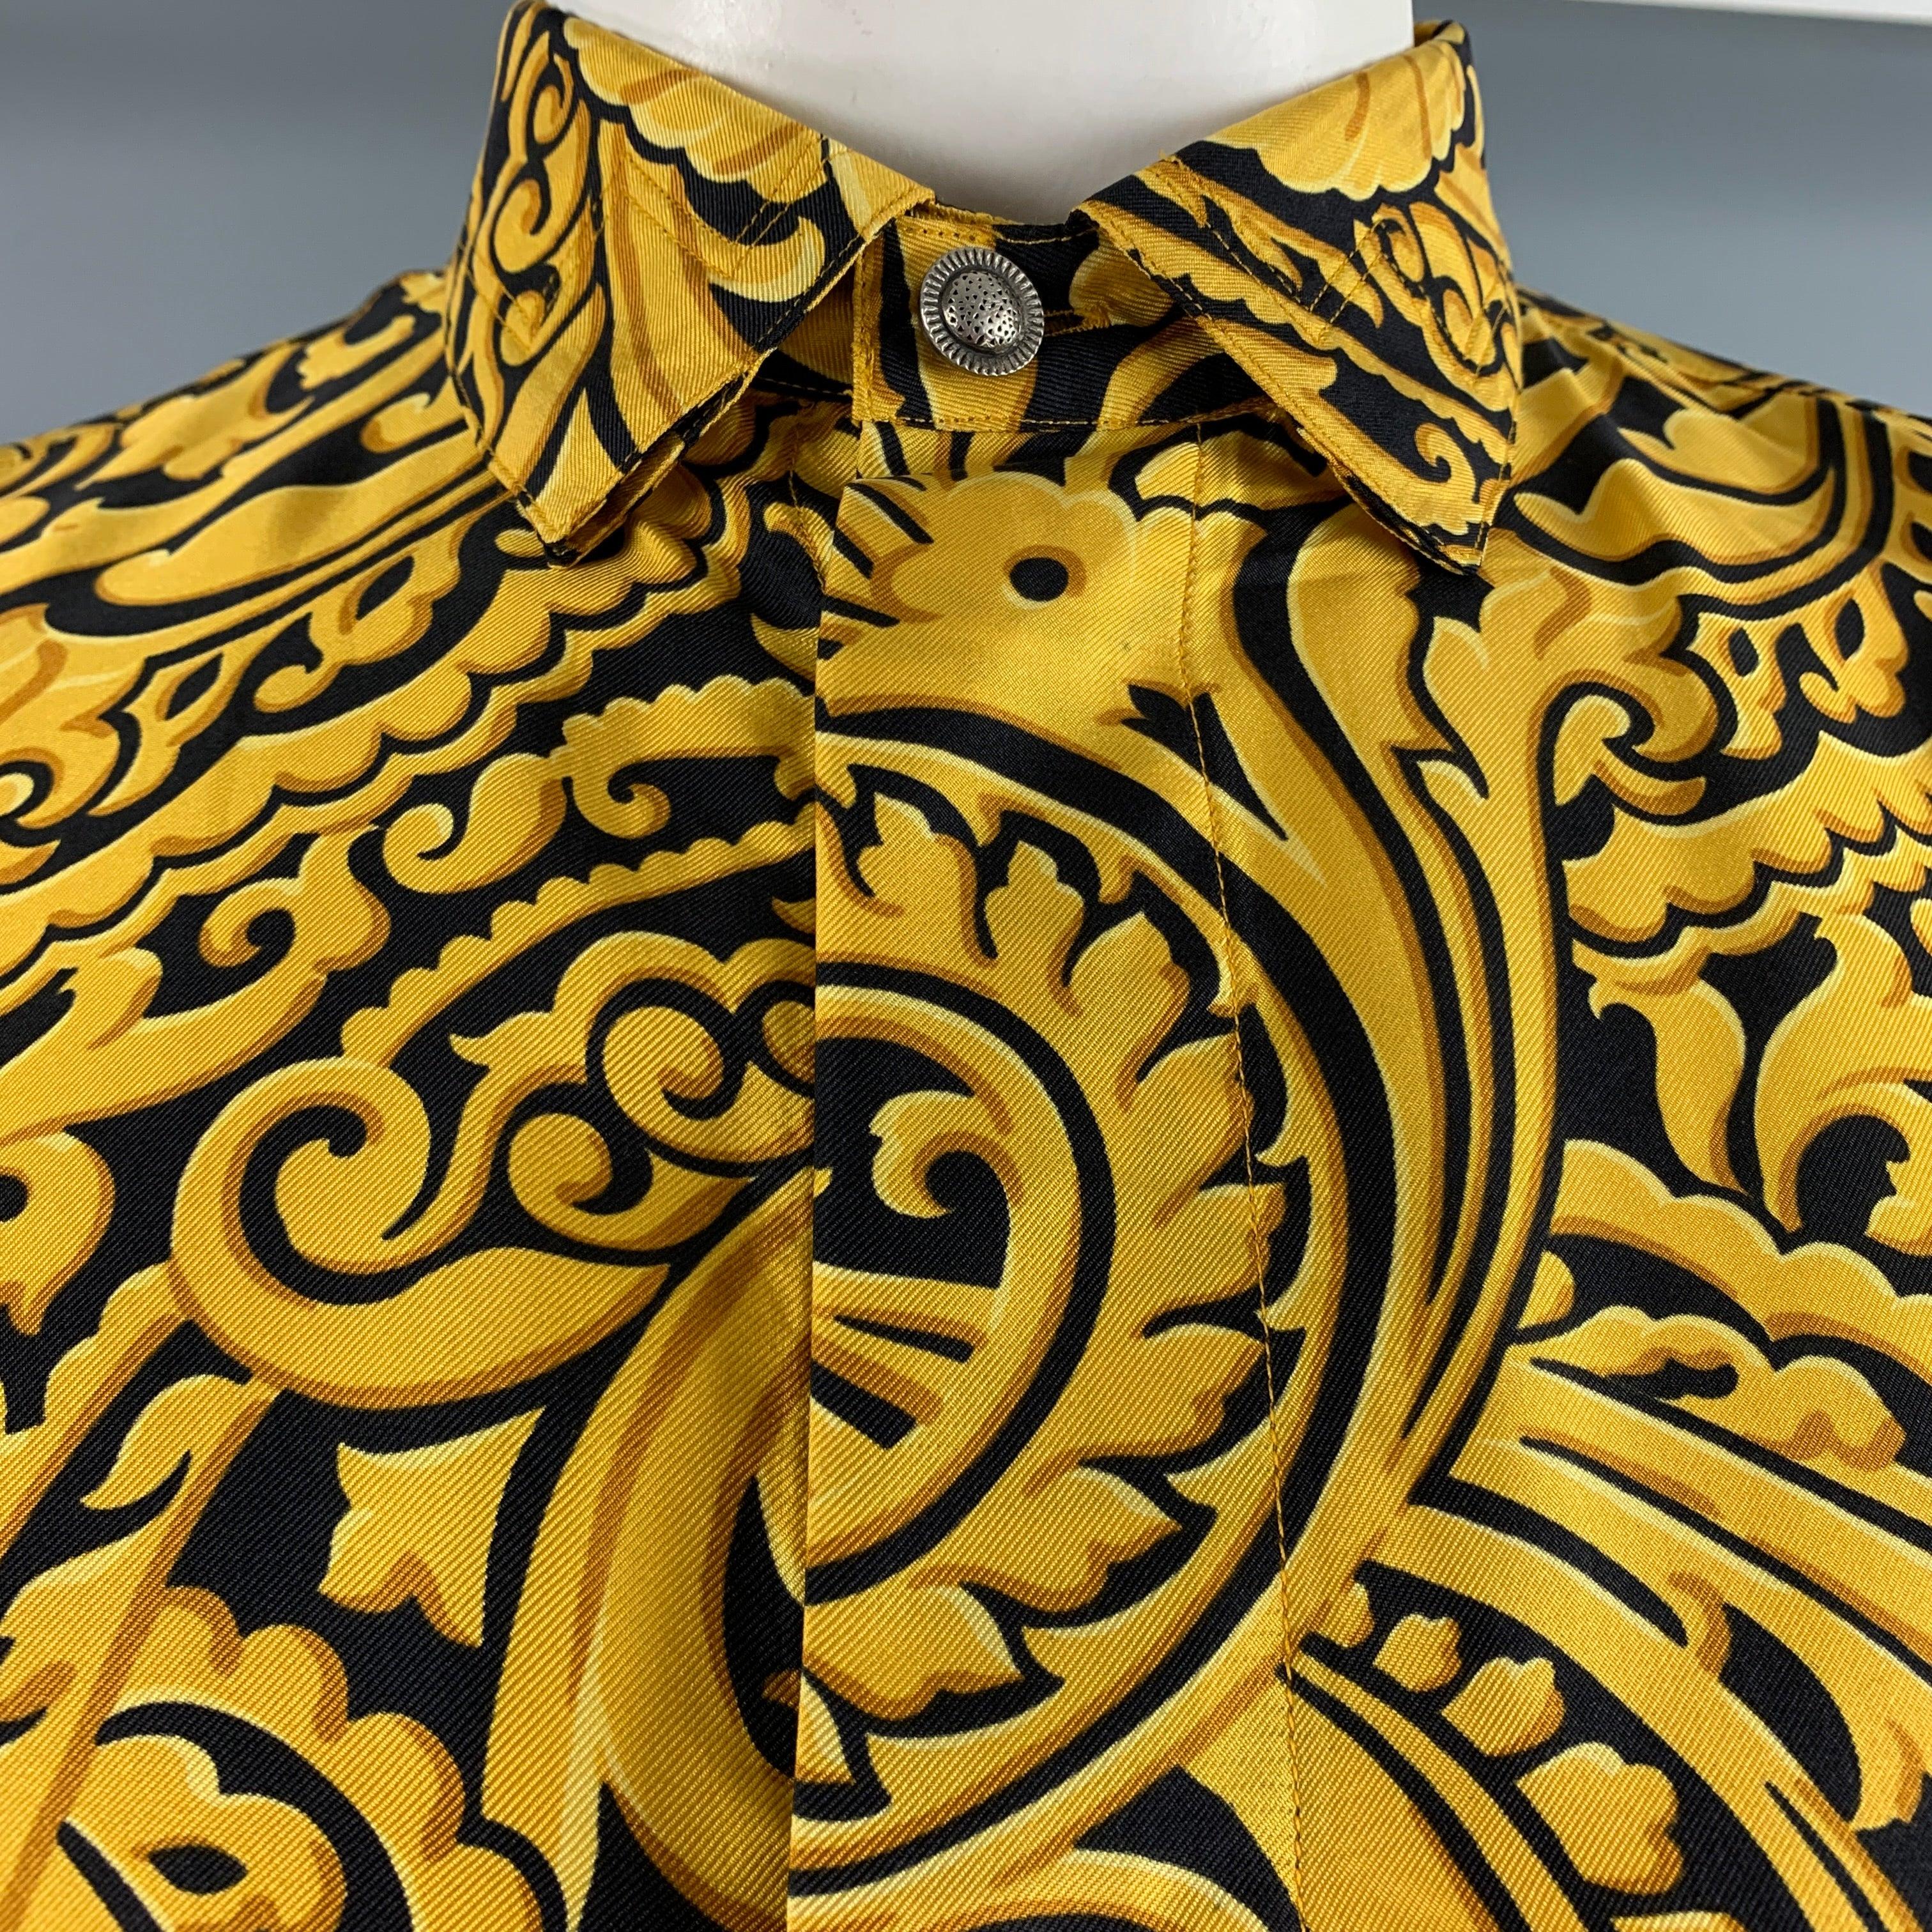 VERSUS by GIANNI VERSACE VINTAGE long sleeve shirt comes in a black and gold printed silk woven material featuring a drop shoulder, straight collar, and a hidden packet with button up closure. Made in Italy.Excellent Pre-Owned Condition. 

Marked:  